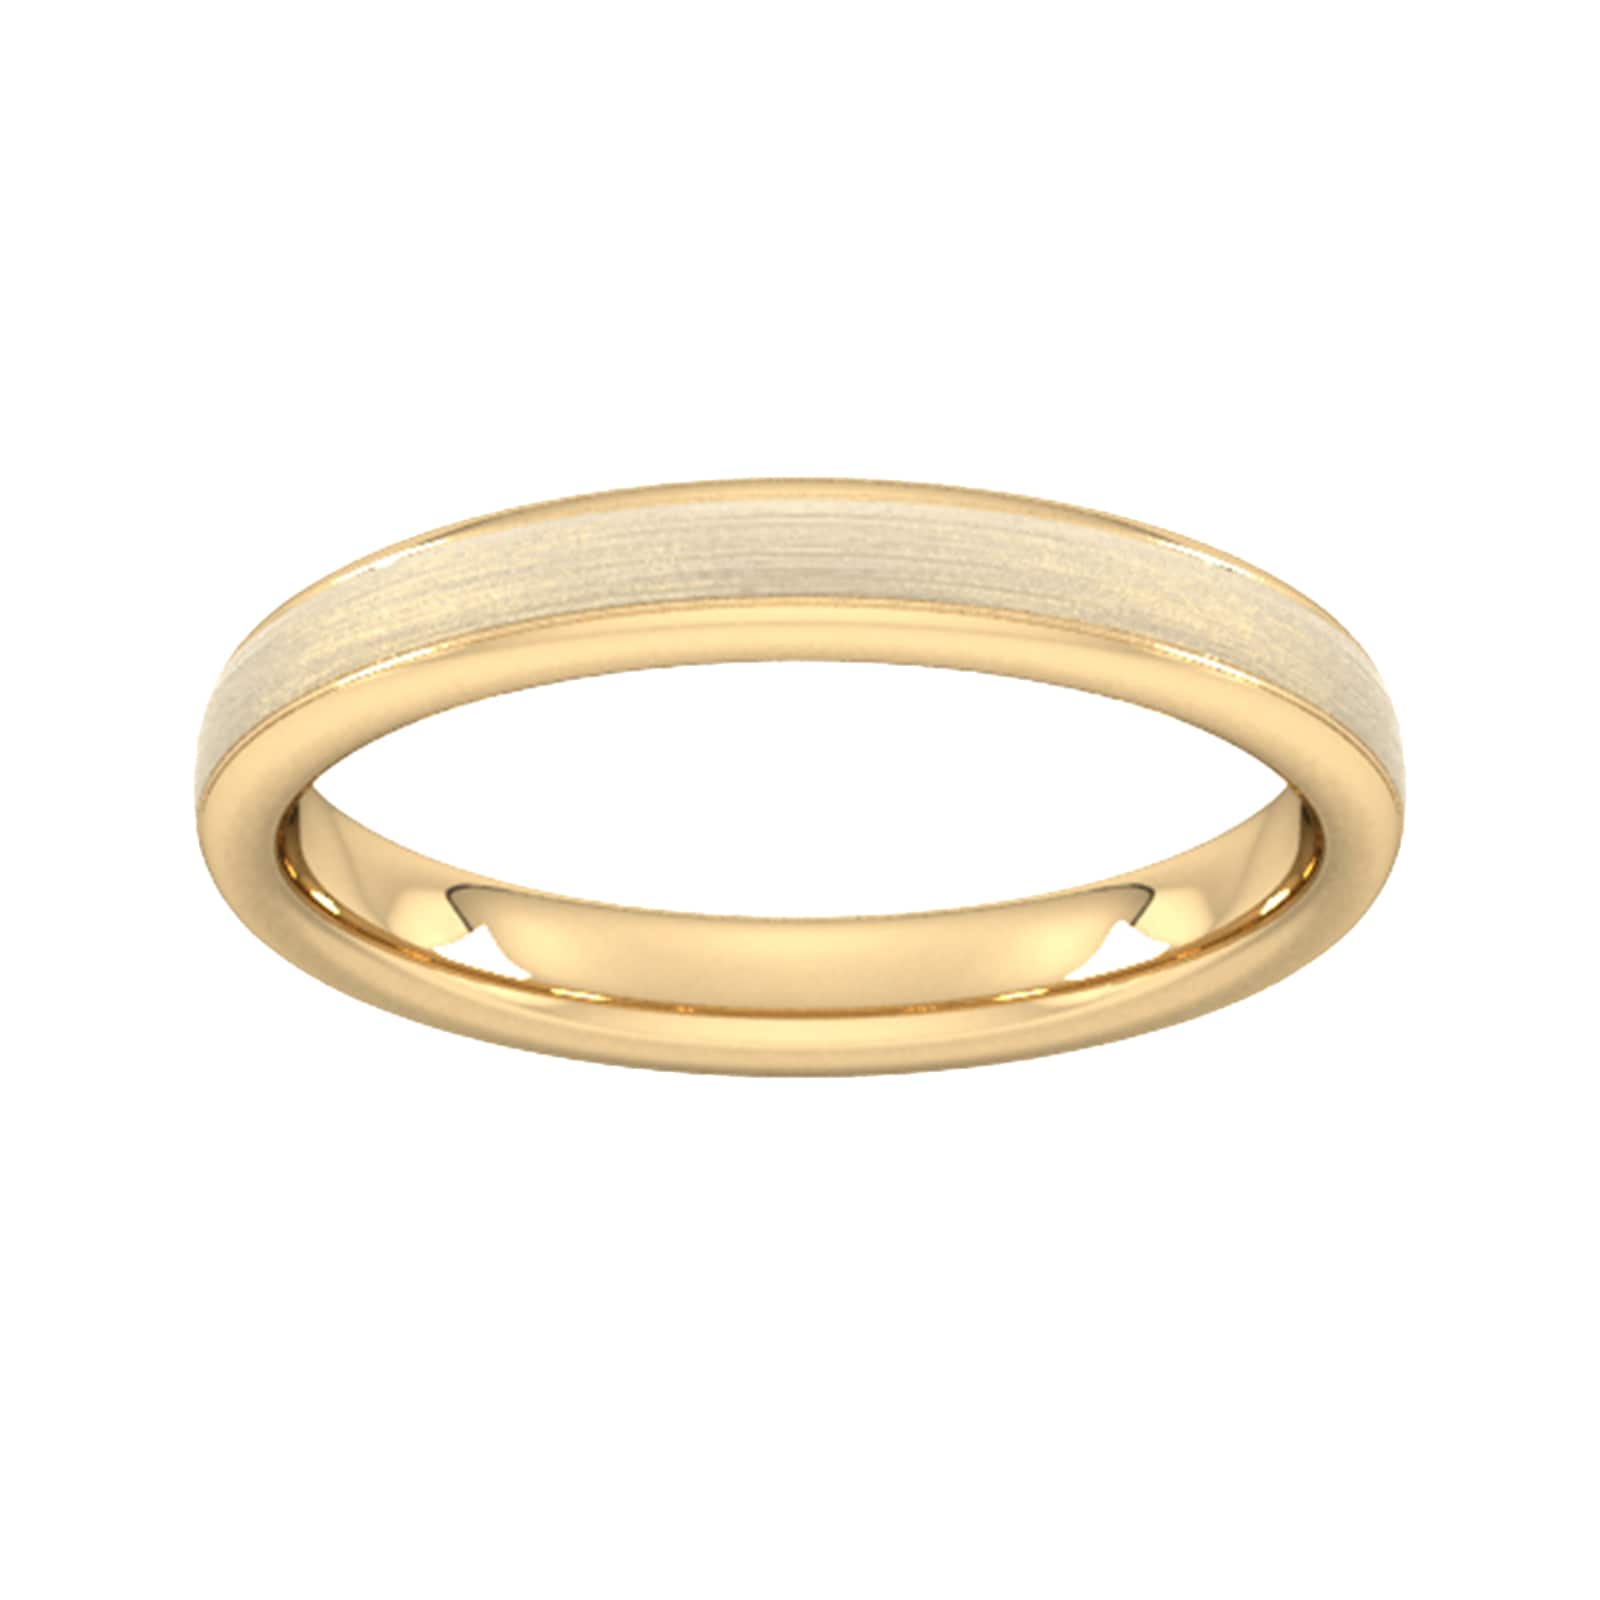 3mm Slight Court Heavy Matt Centre With Grooves Wedding Ring In 18 Carat Yellow Gold - Ring Size J